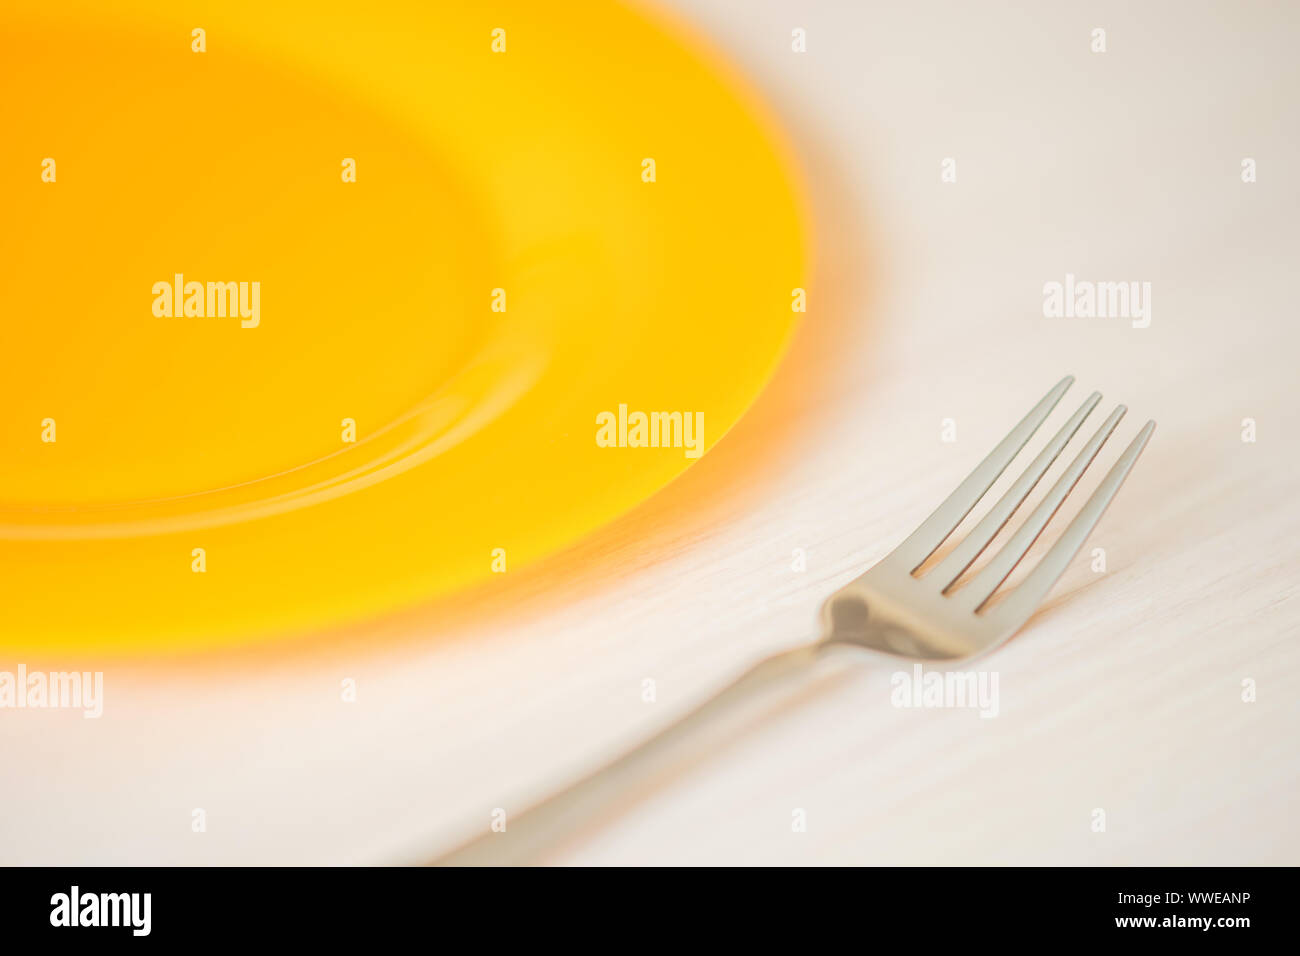 https://c8.alamy.com/comp/WWEANP/orange-plate-and-fork-closeup-on-the-light-wooden-table-WWEANP.jpg